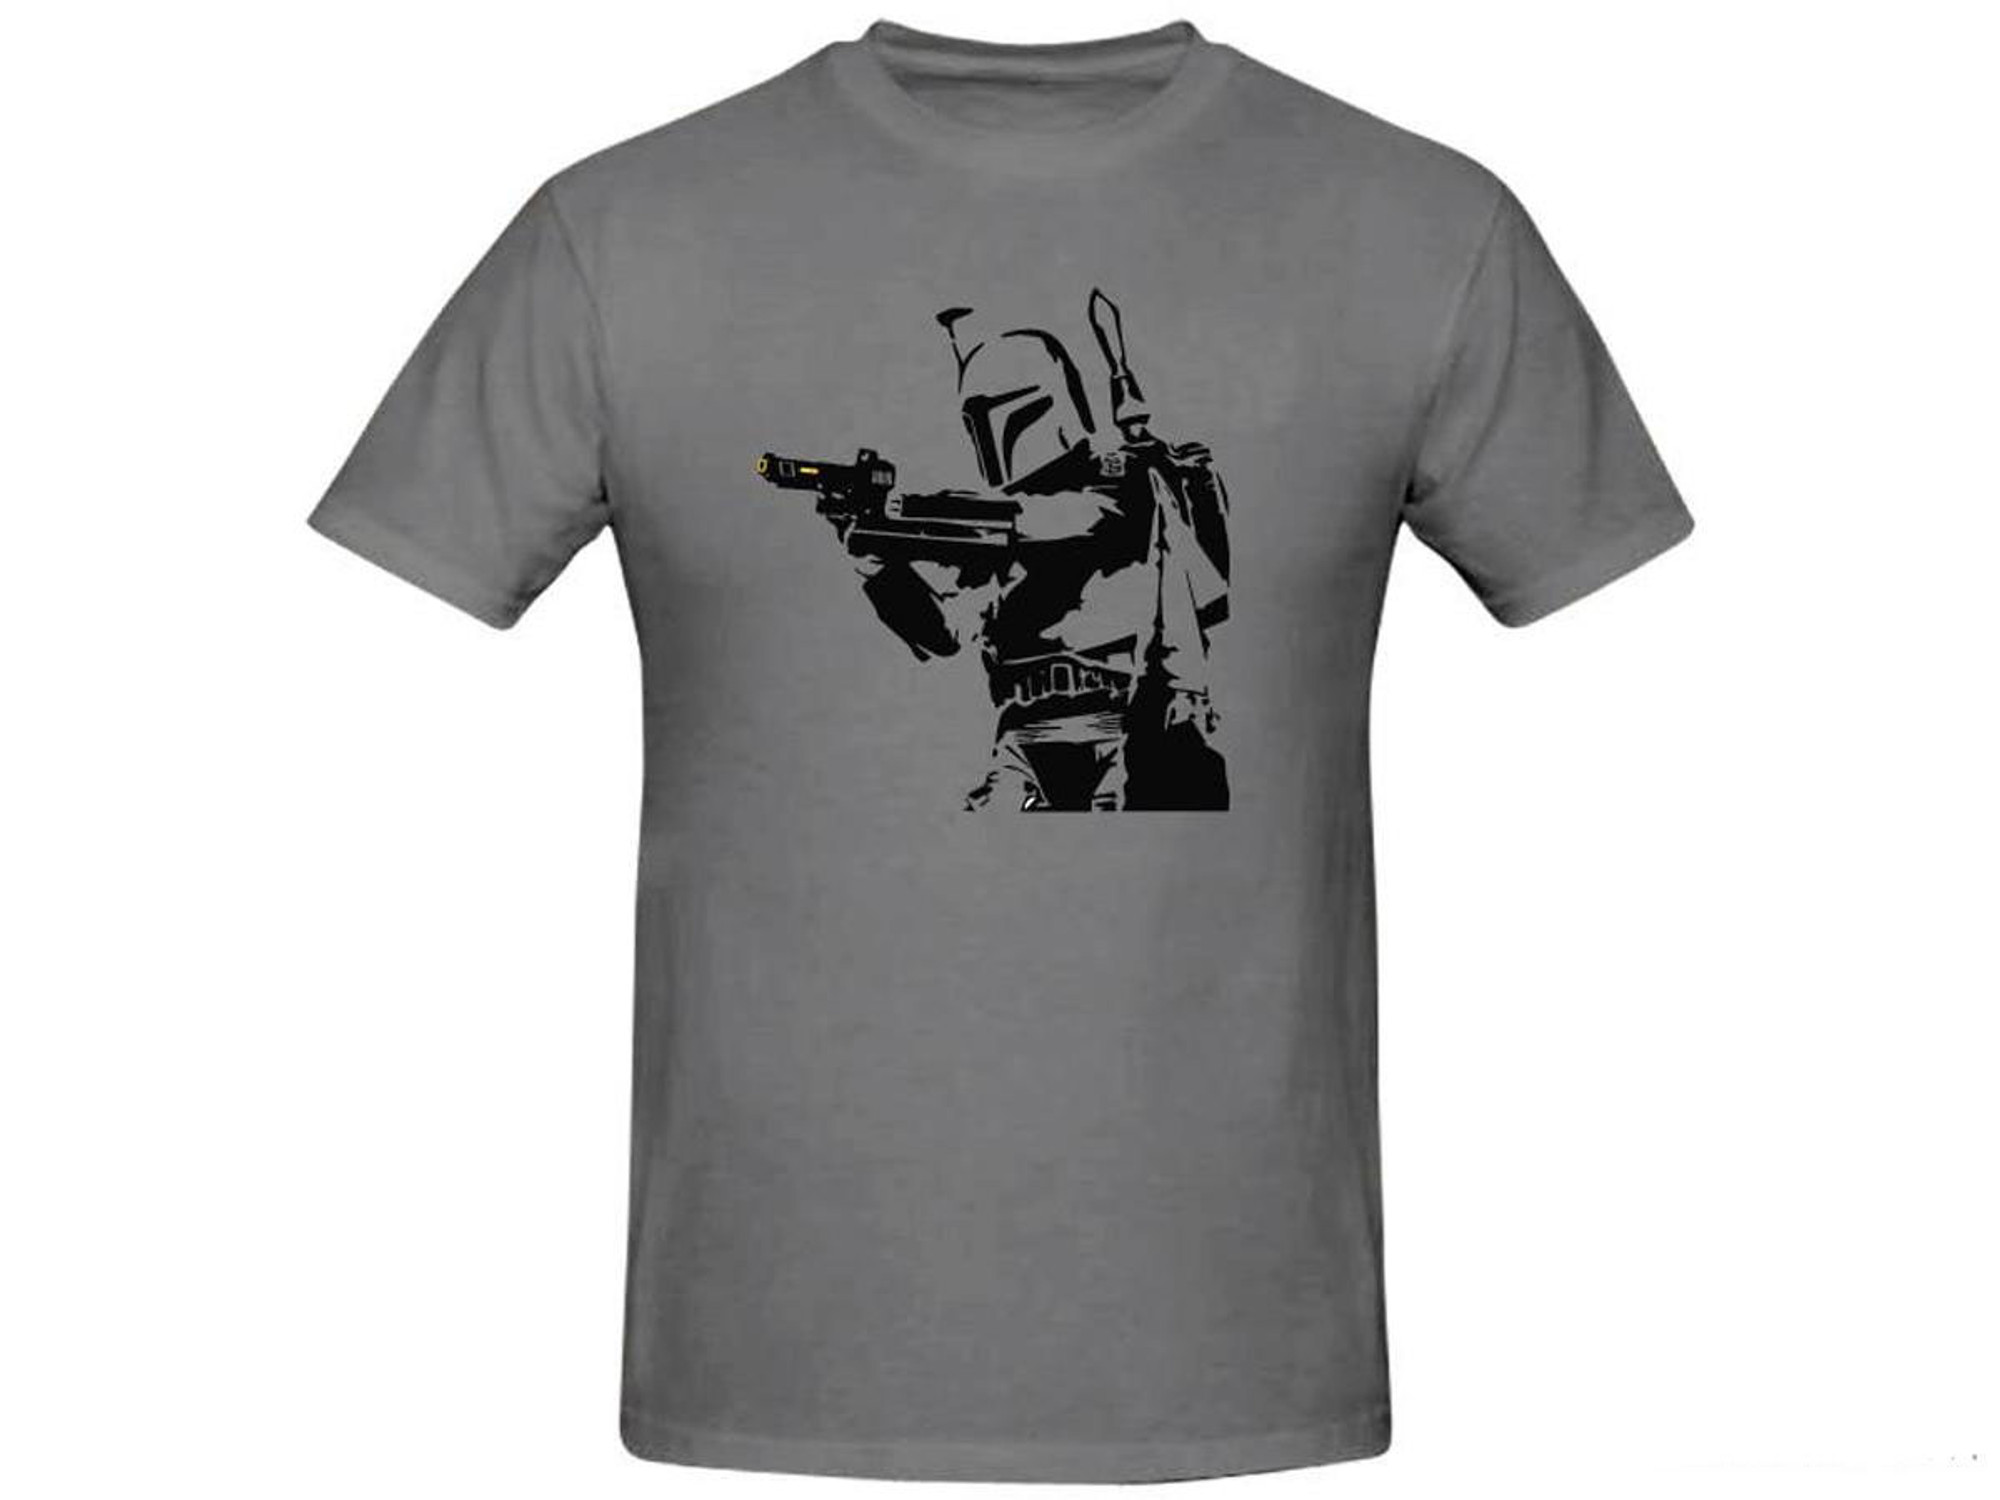 Salient Arms "Bobba Fett" Screen Printed Cotton T-Shirt (Size: Womens Large)